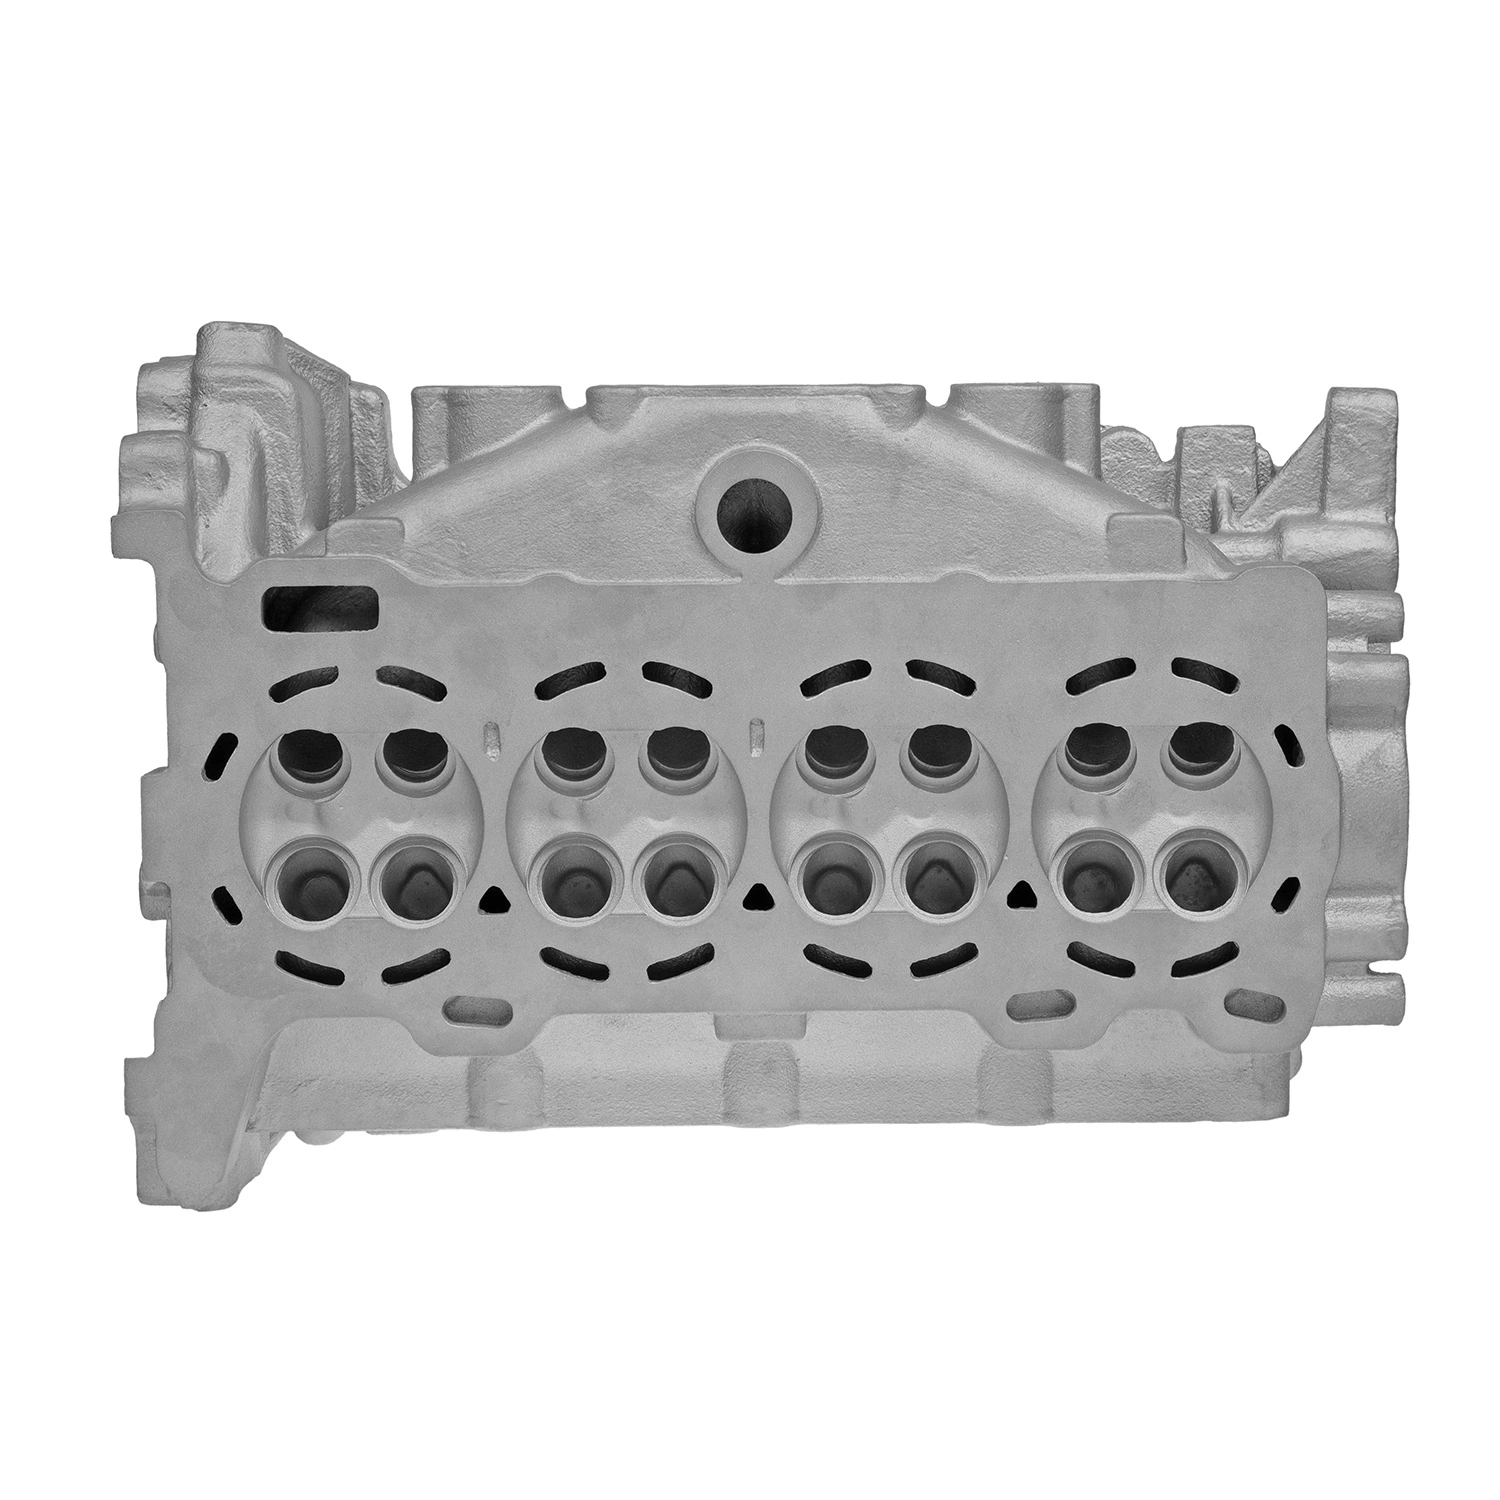 Cast Iron Bearing Housing OEM Customized 3D Printing Sand Casting Aluminum Engine and Iron Stainless Steel Part